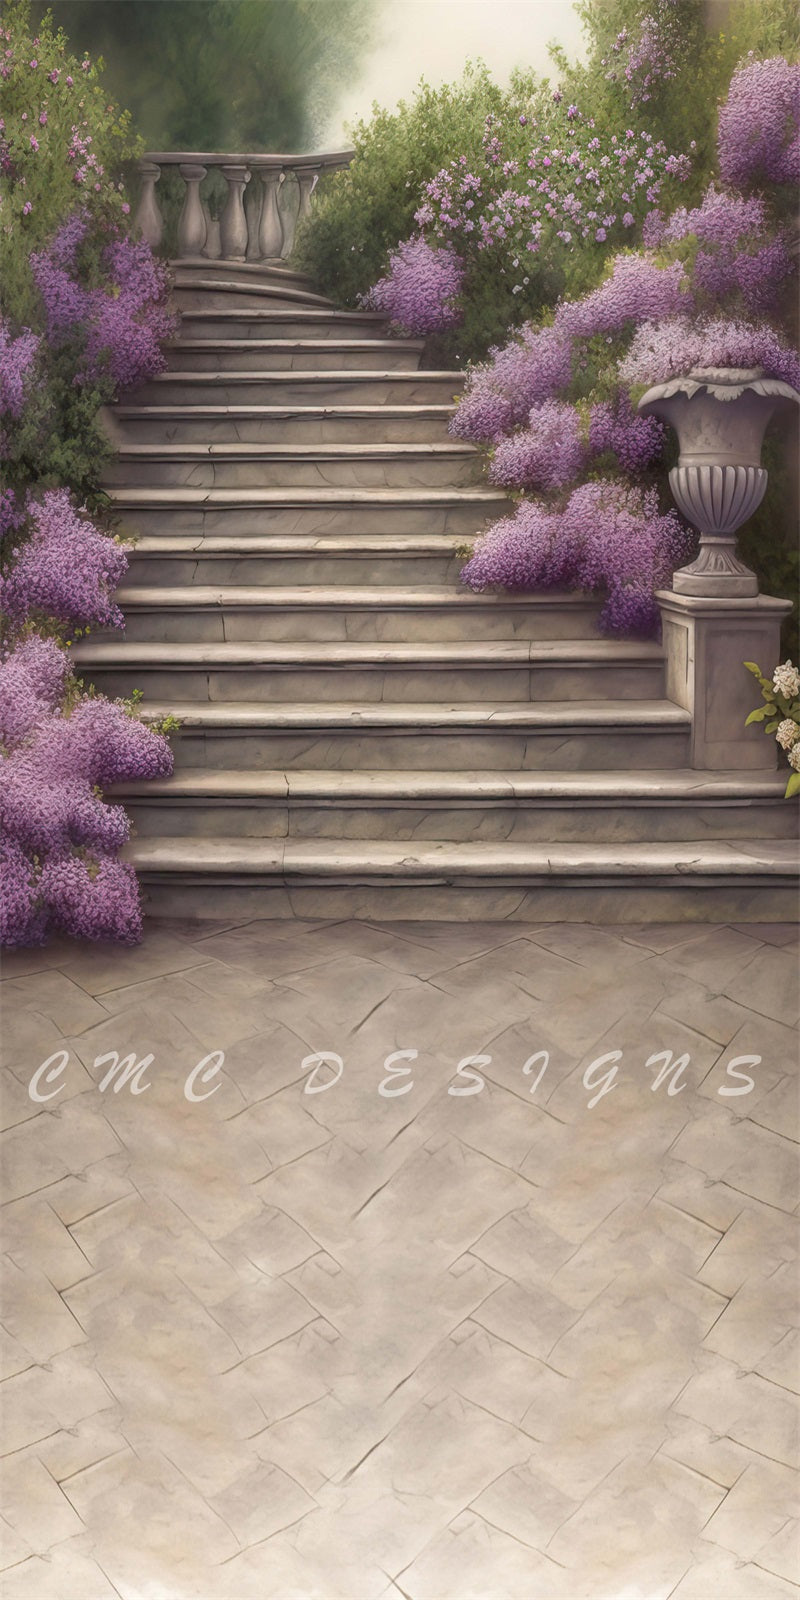 Kate Sweep Lavender Stairs Backdrop for Photography Designed by Candice Compton